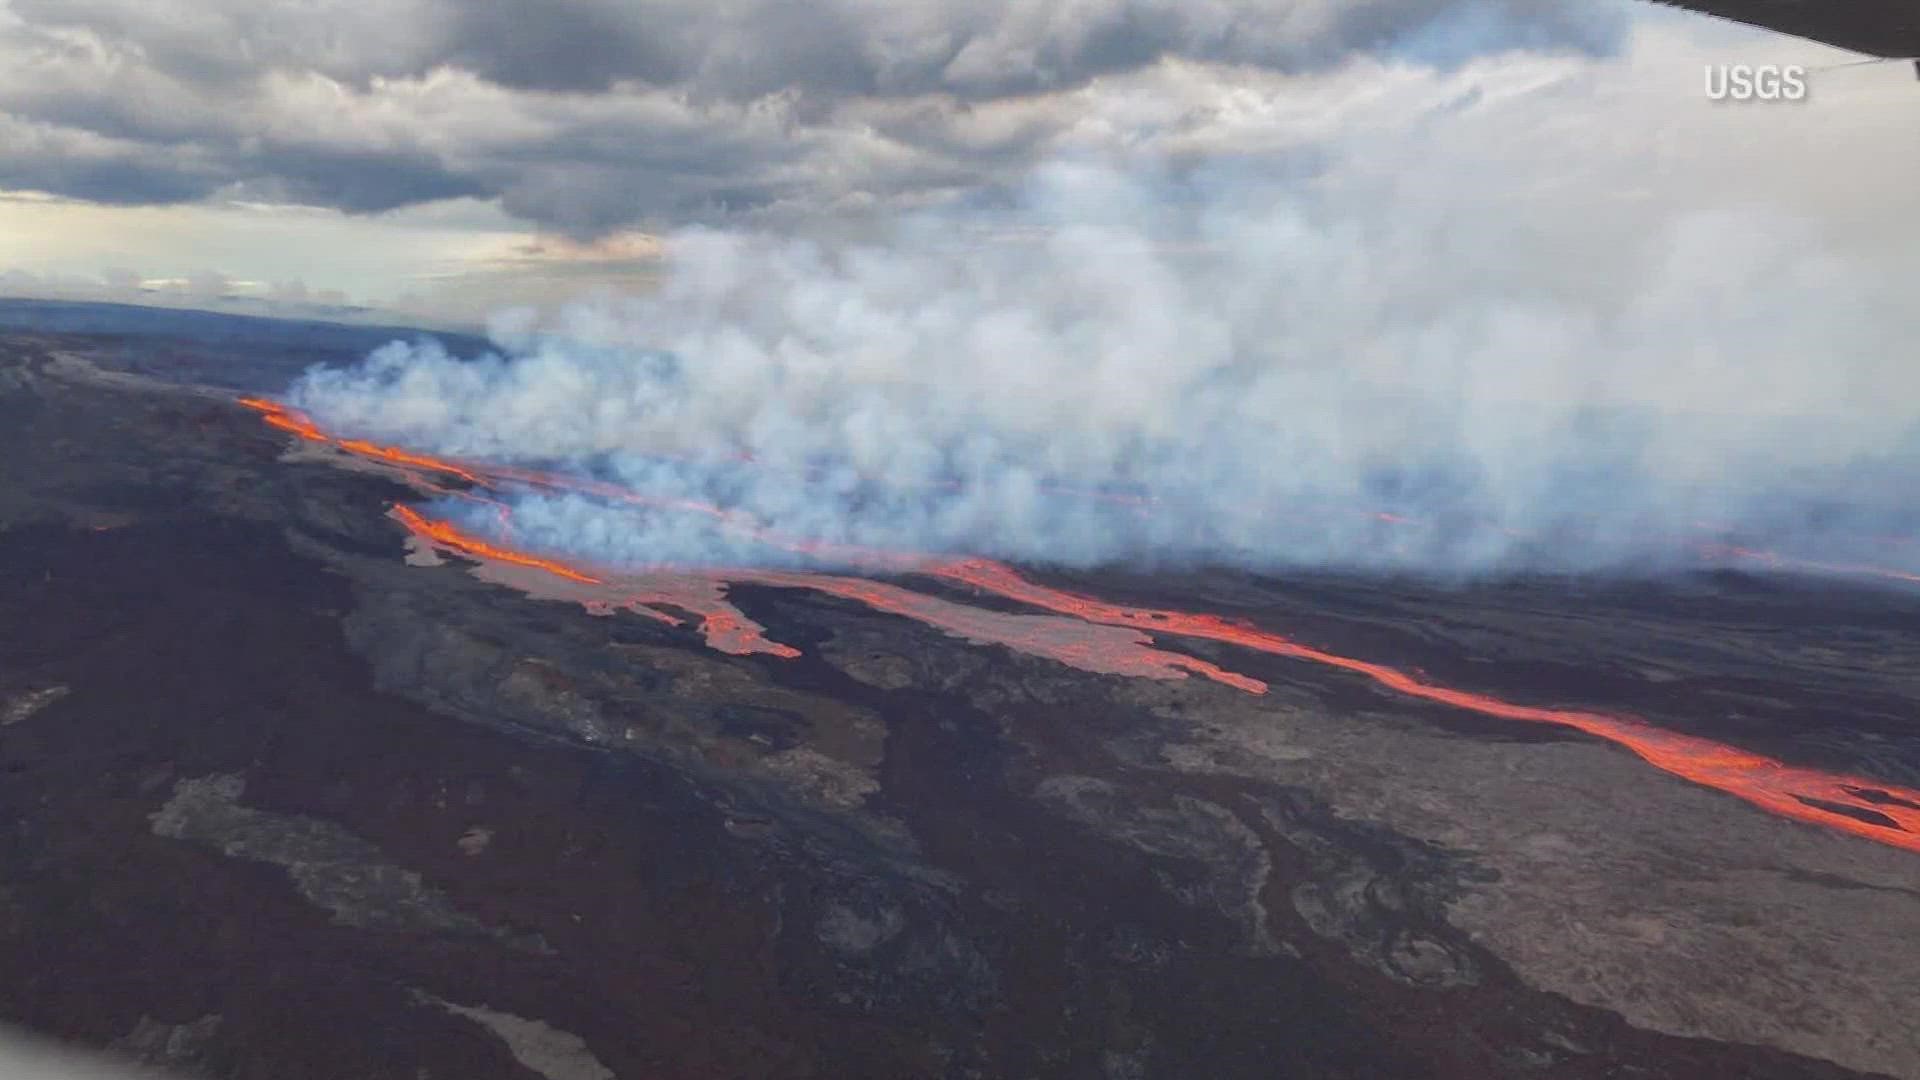 Magma moved to the surface, although lava flows were contained within the summit area and weren't threatening nearby communities.